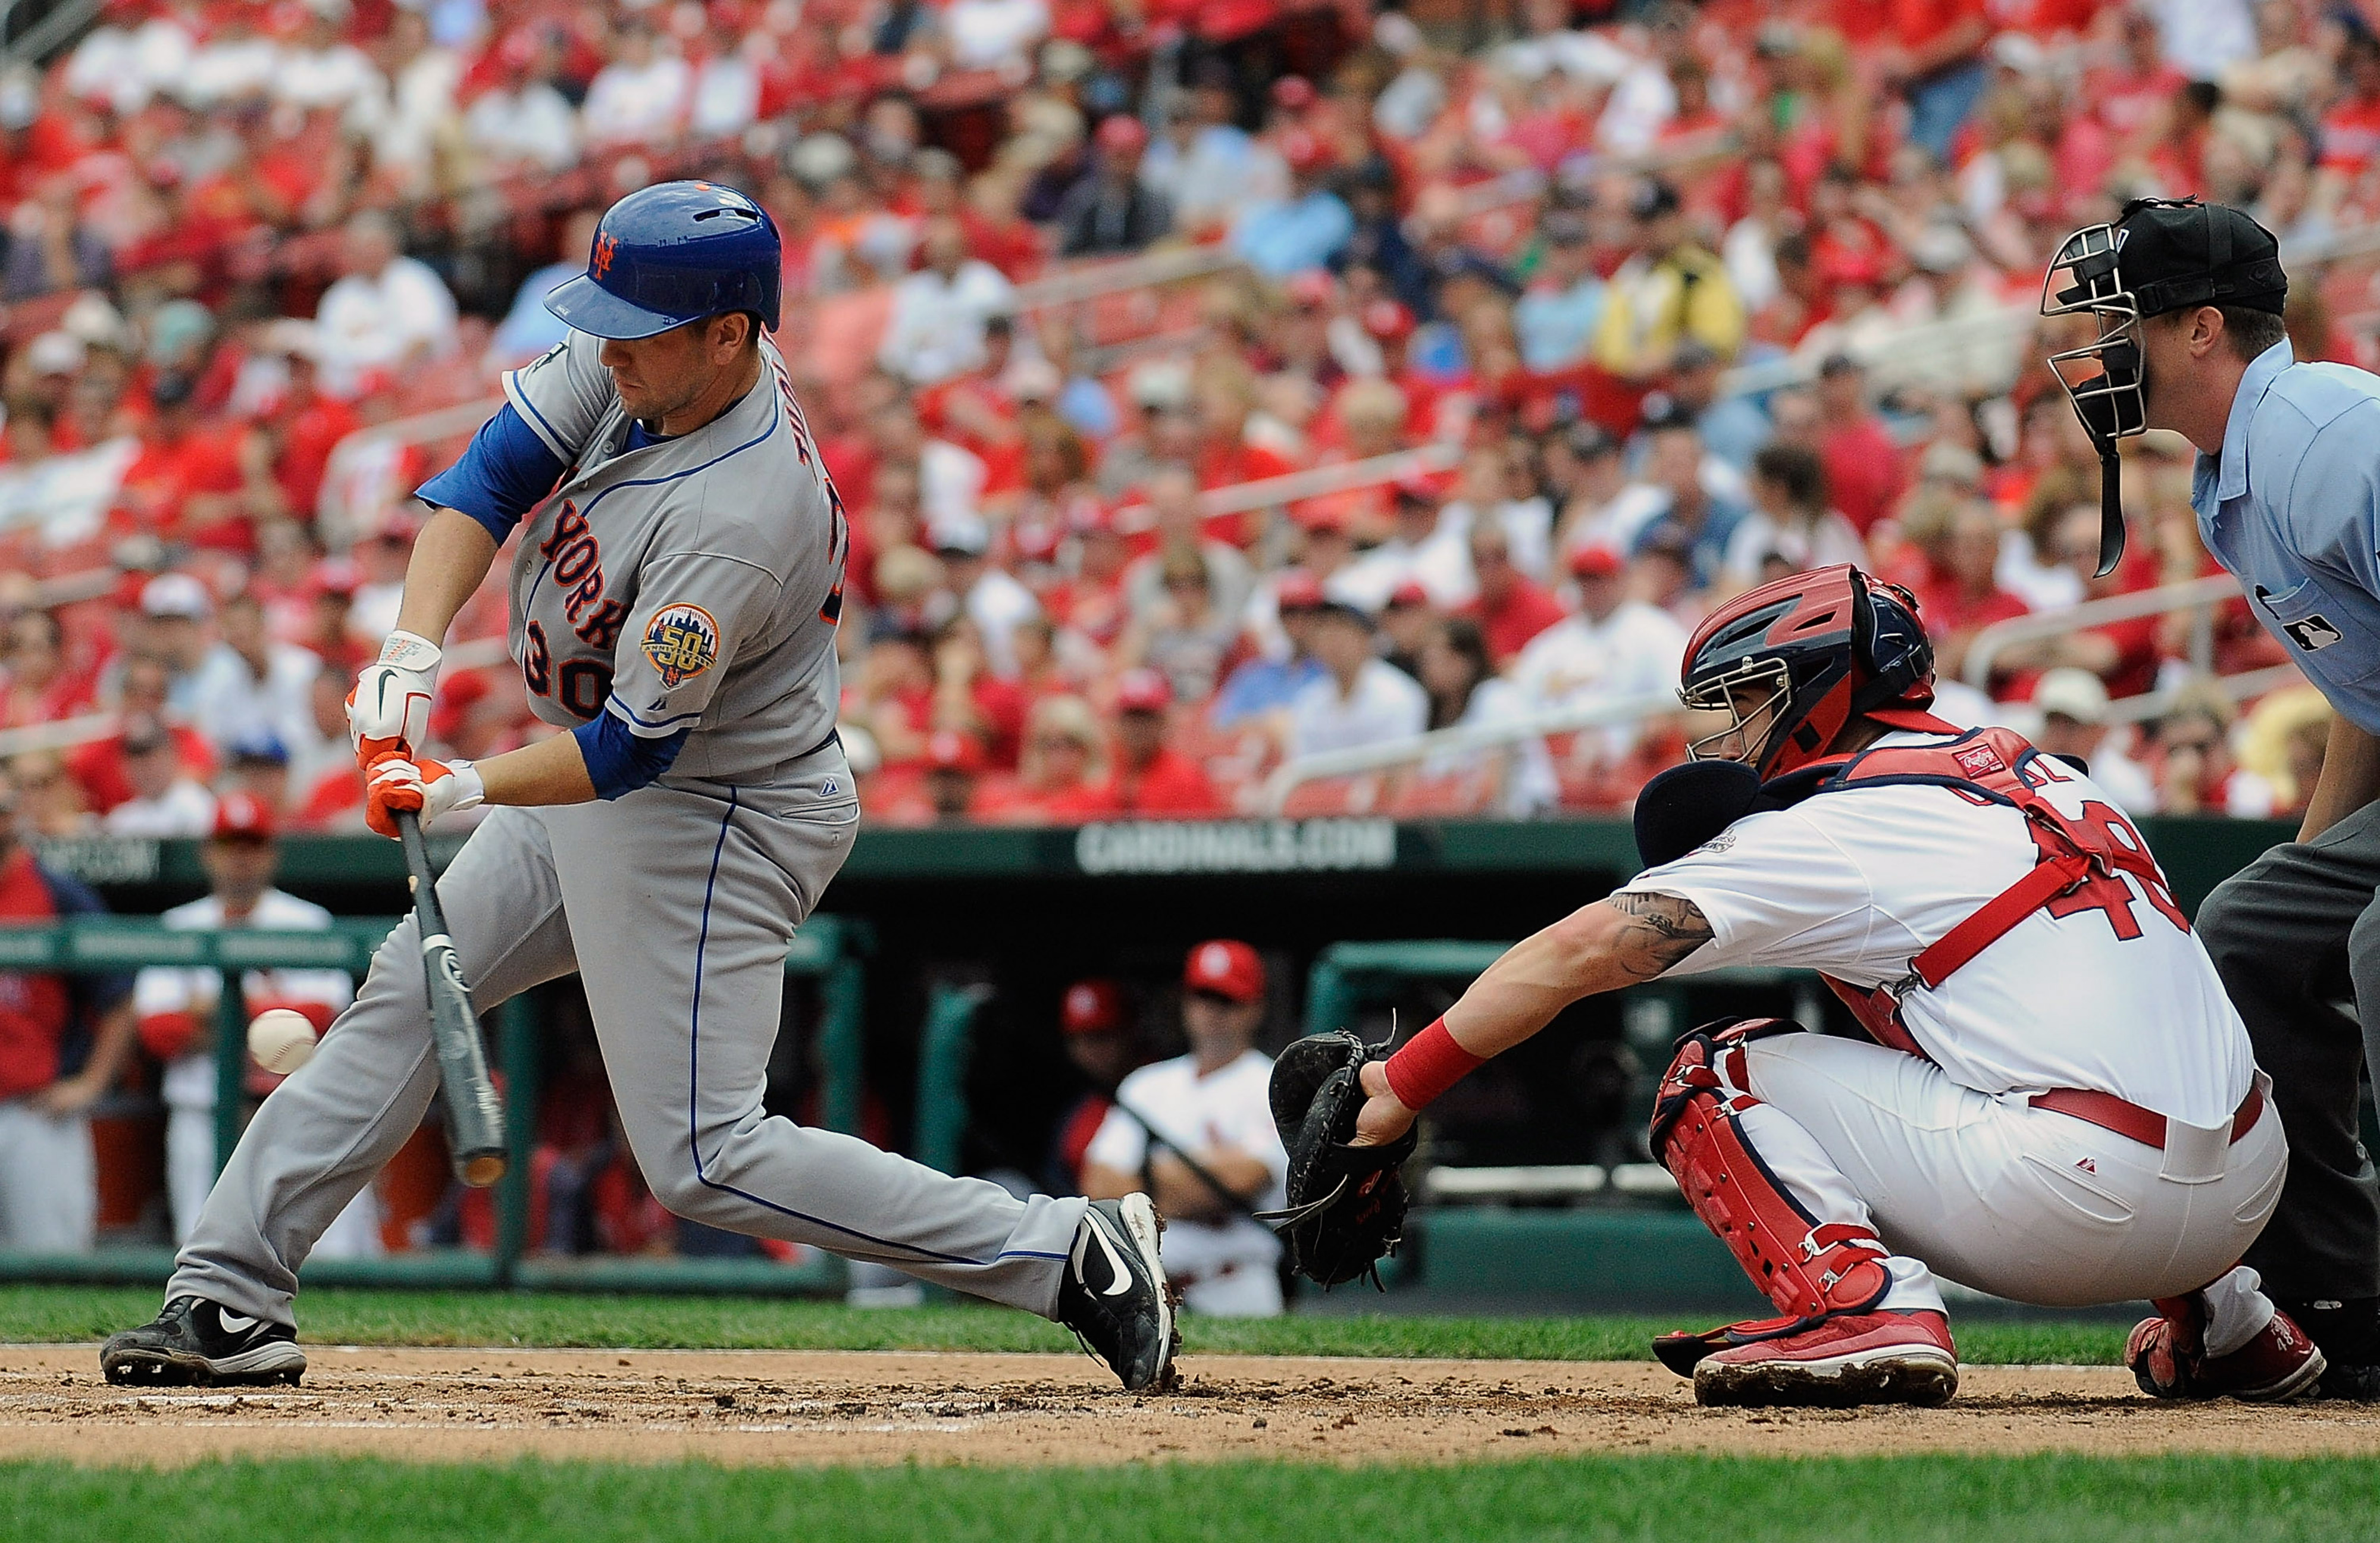 ST. LOUIS, MO - SEPTEMBER 5: Josh Thole #30 of the New York Mets hits a one run single against the St. Louis Cardinals at Busch Stadium on September 5, 2012 in St. Louis, Missouri. (Photo by Jeff Curry/Getty Images)